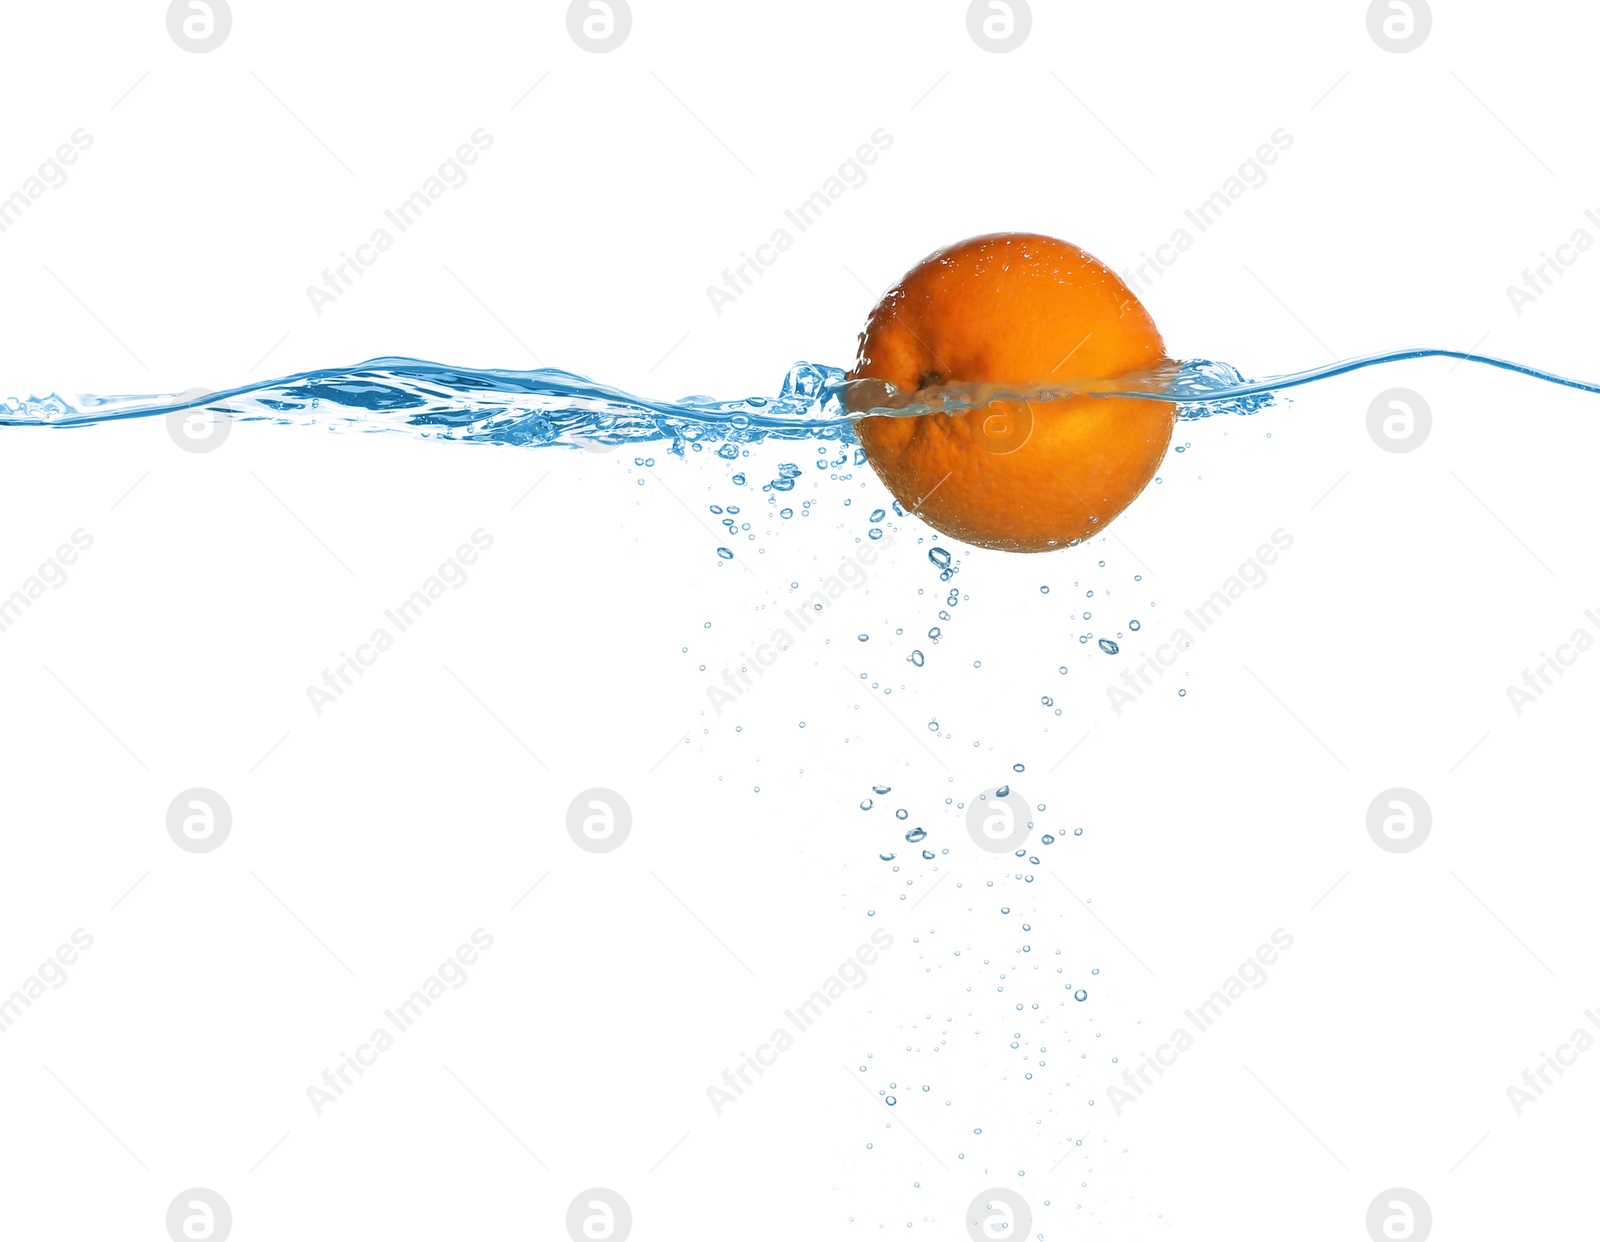 Photo of Ripe orange falling down into clear water against white background